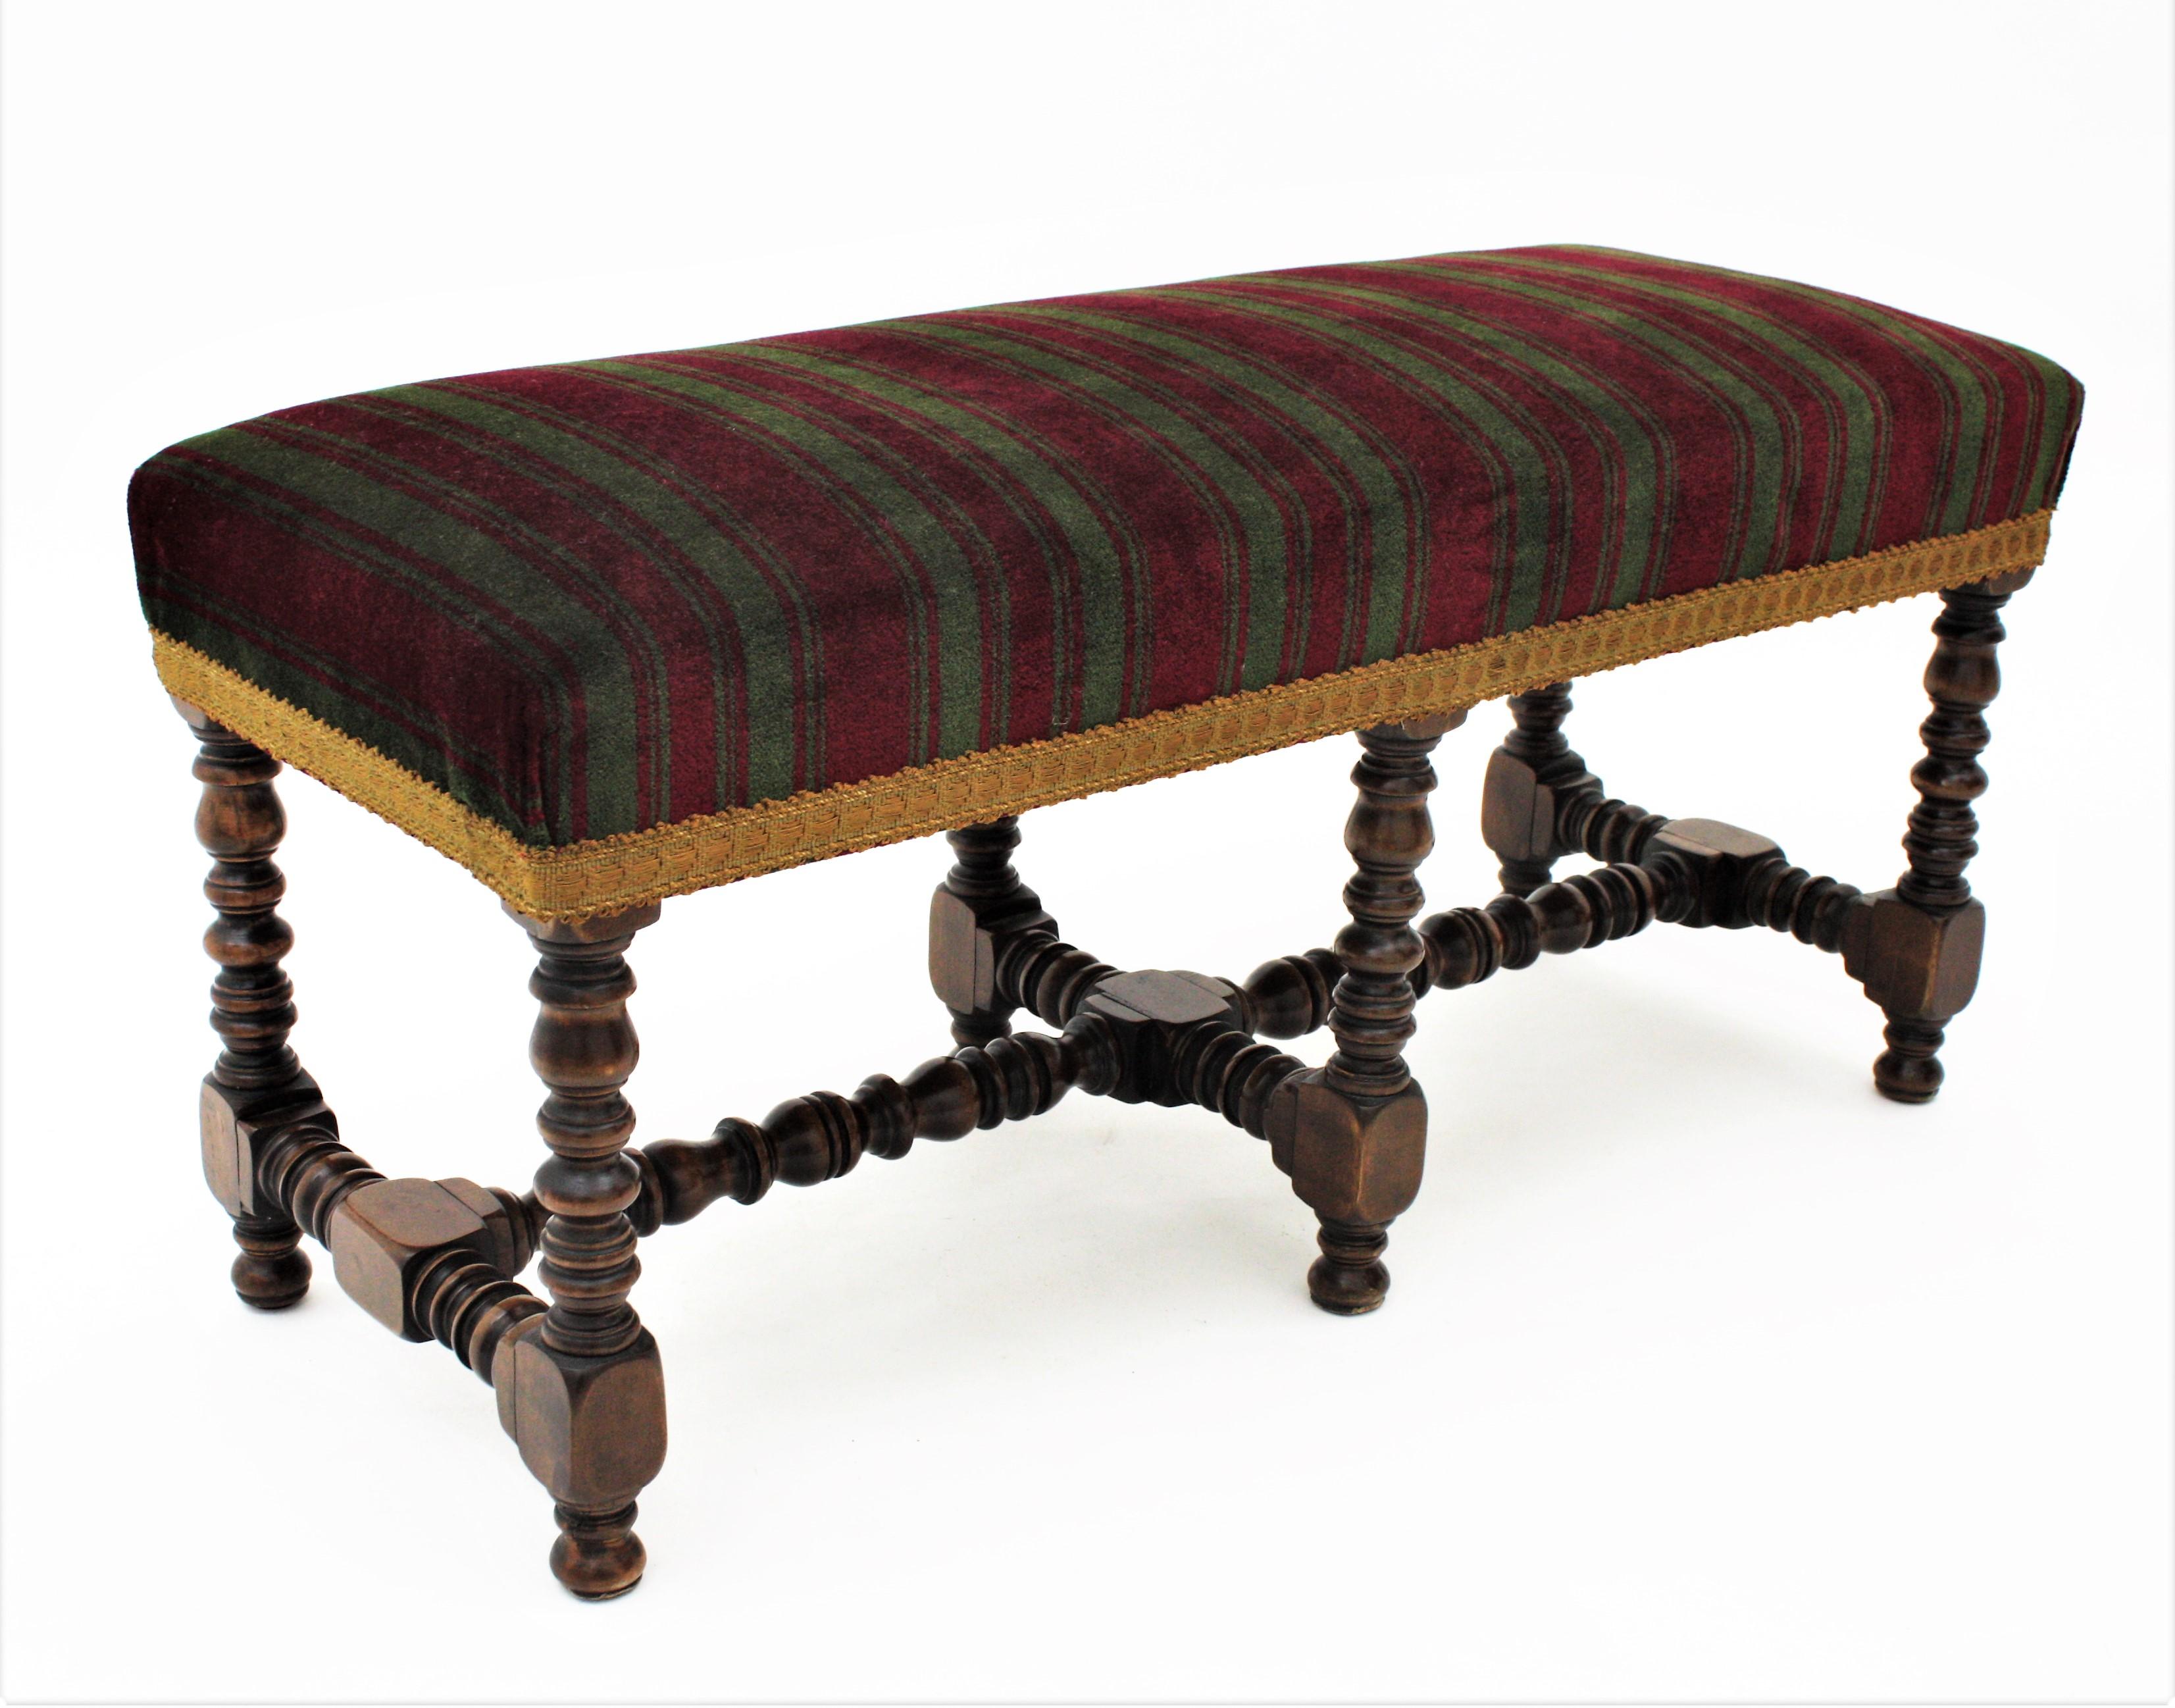 Spanish Louis XIII Style Turned Wood Long Bench / Stool by Valenti, Spain 1940s For Sale